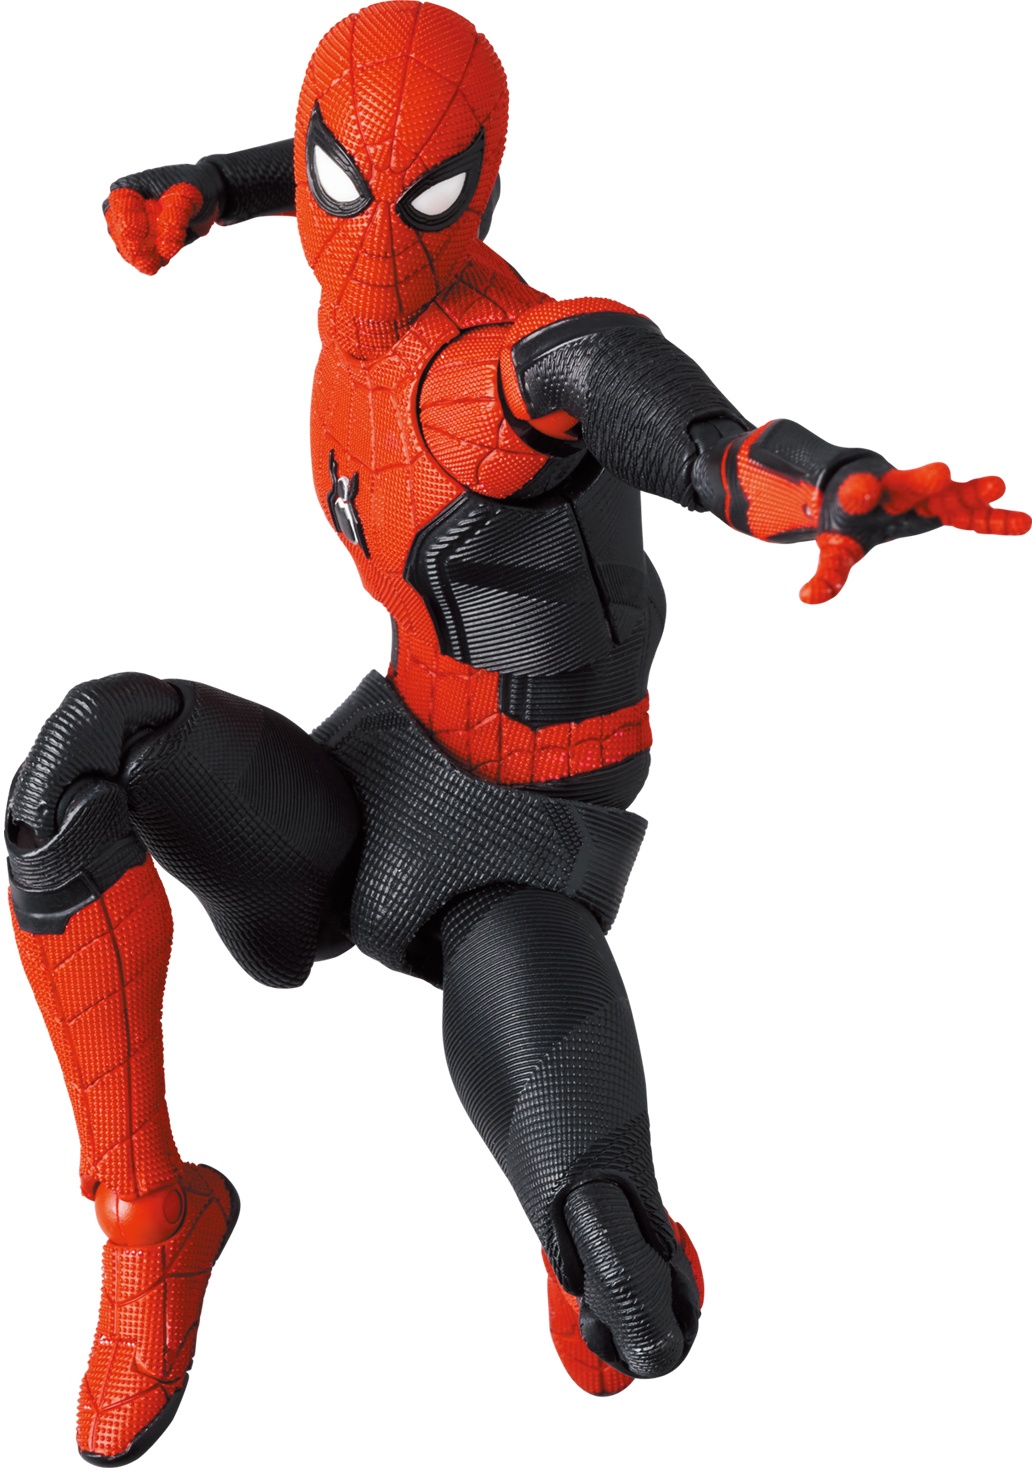 Tamashi Nations Spider-Man: Now Way Home Spider-Man (Upgraded Suit